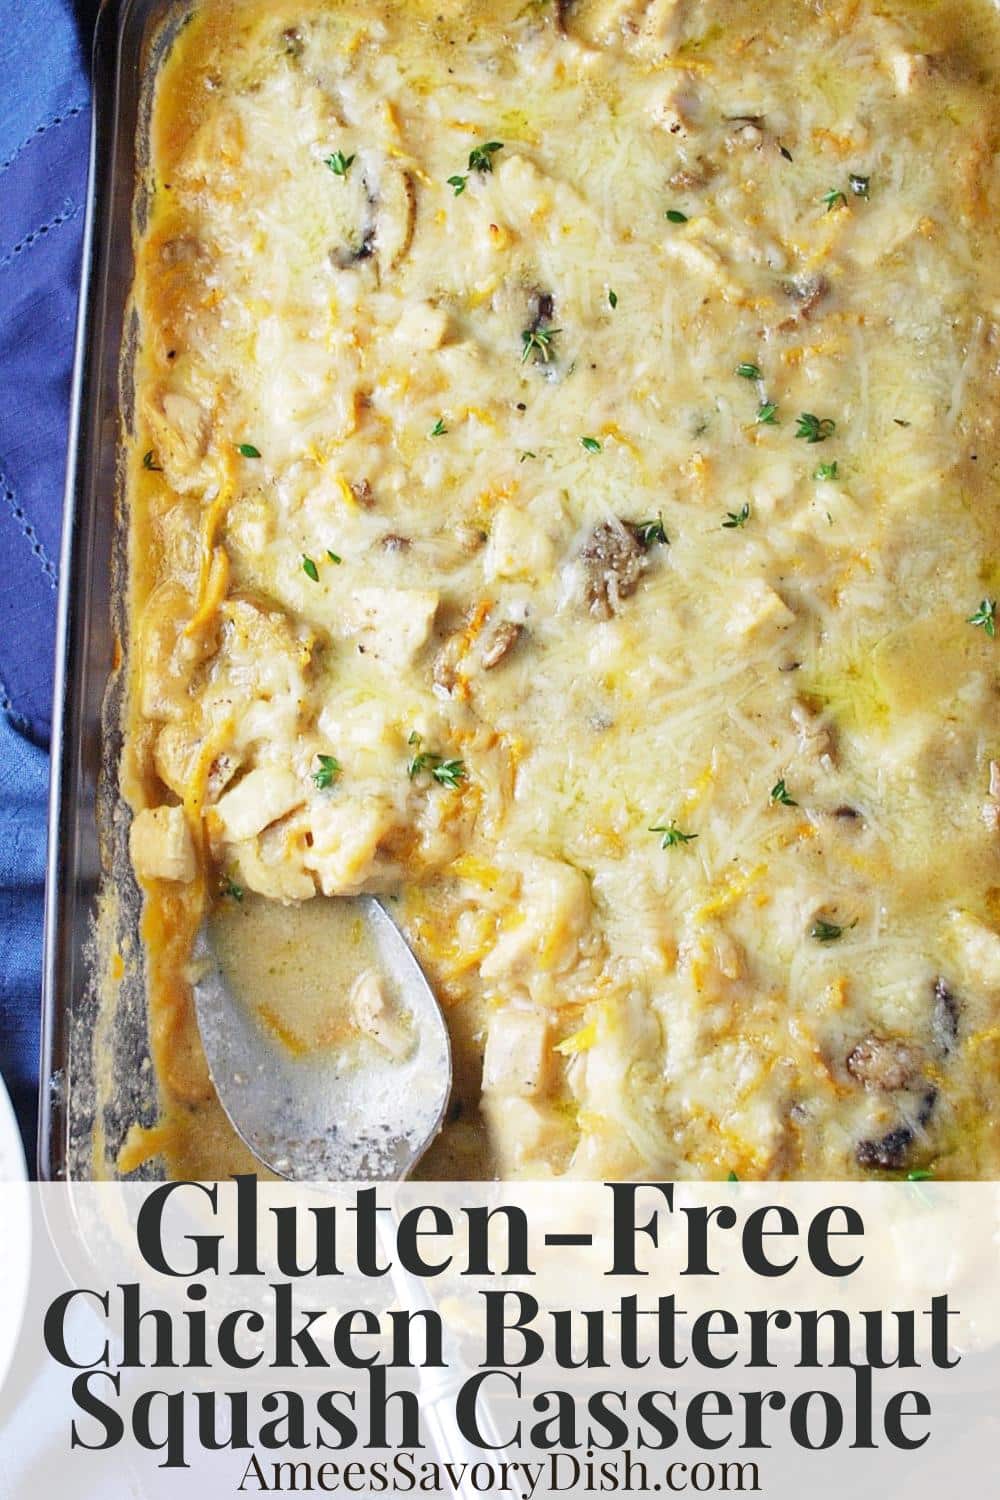 This easy gluten-free Chicken Butternut Squash Casserole is delicious low-carb comfort food, made with boneless chicken breasts and spiralized squash. via @Ameessavorydish